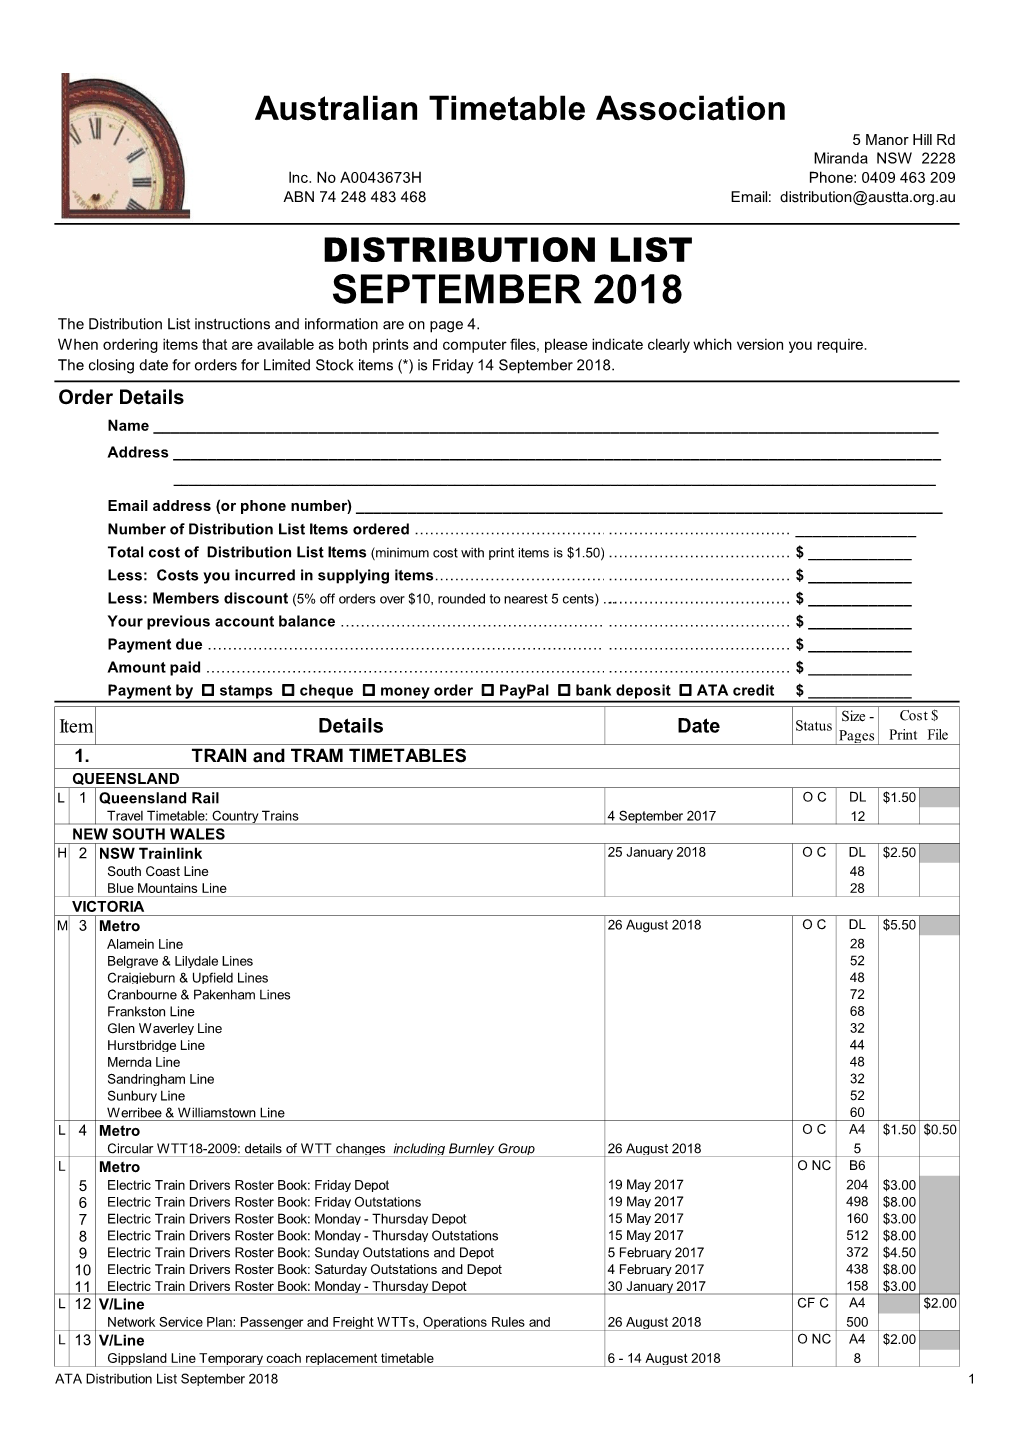 SEPTEMBER 2018 the Distribution List Instructions and Information Are on Page 4